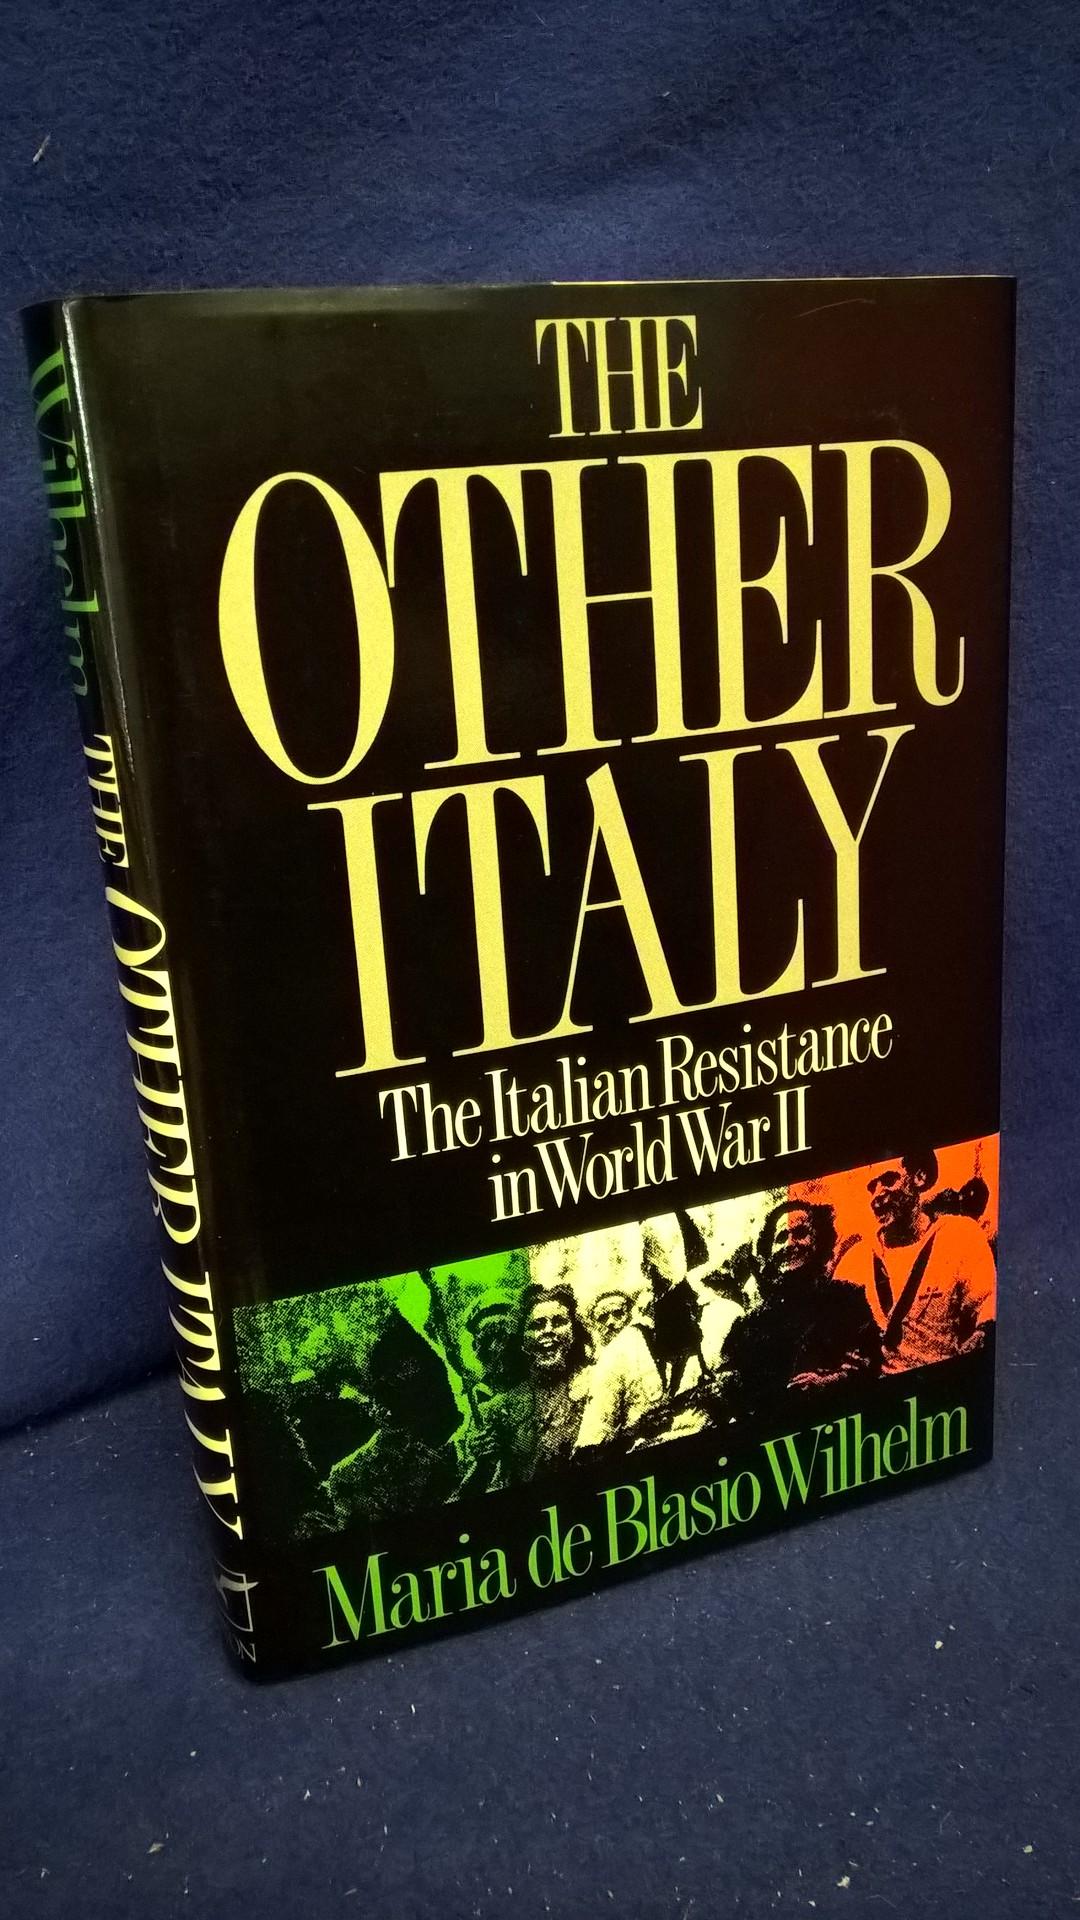 The Other Italy. Italian Resistance in World War II.